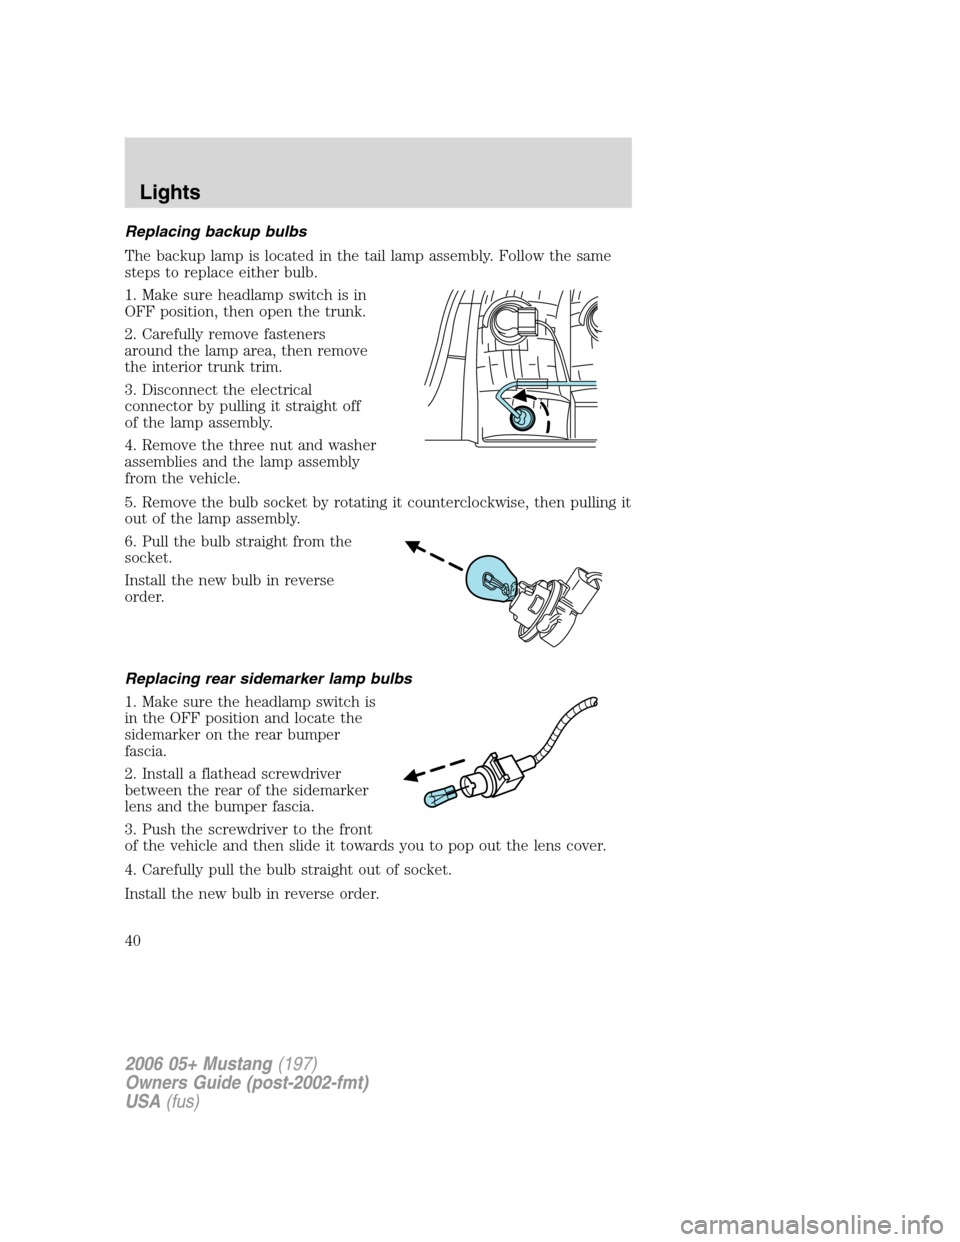 FORD MUSTANG 2006 5.G Owners Manual Replacing backup bulbs
The backup lamp is located in the tail lamp assembly. Follow the same
steps to replace either bulb.
1. Make sure headlamp switch is in
OFF position, then open the trunk.
2. Care